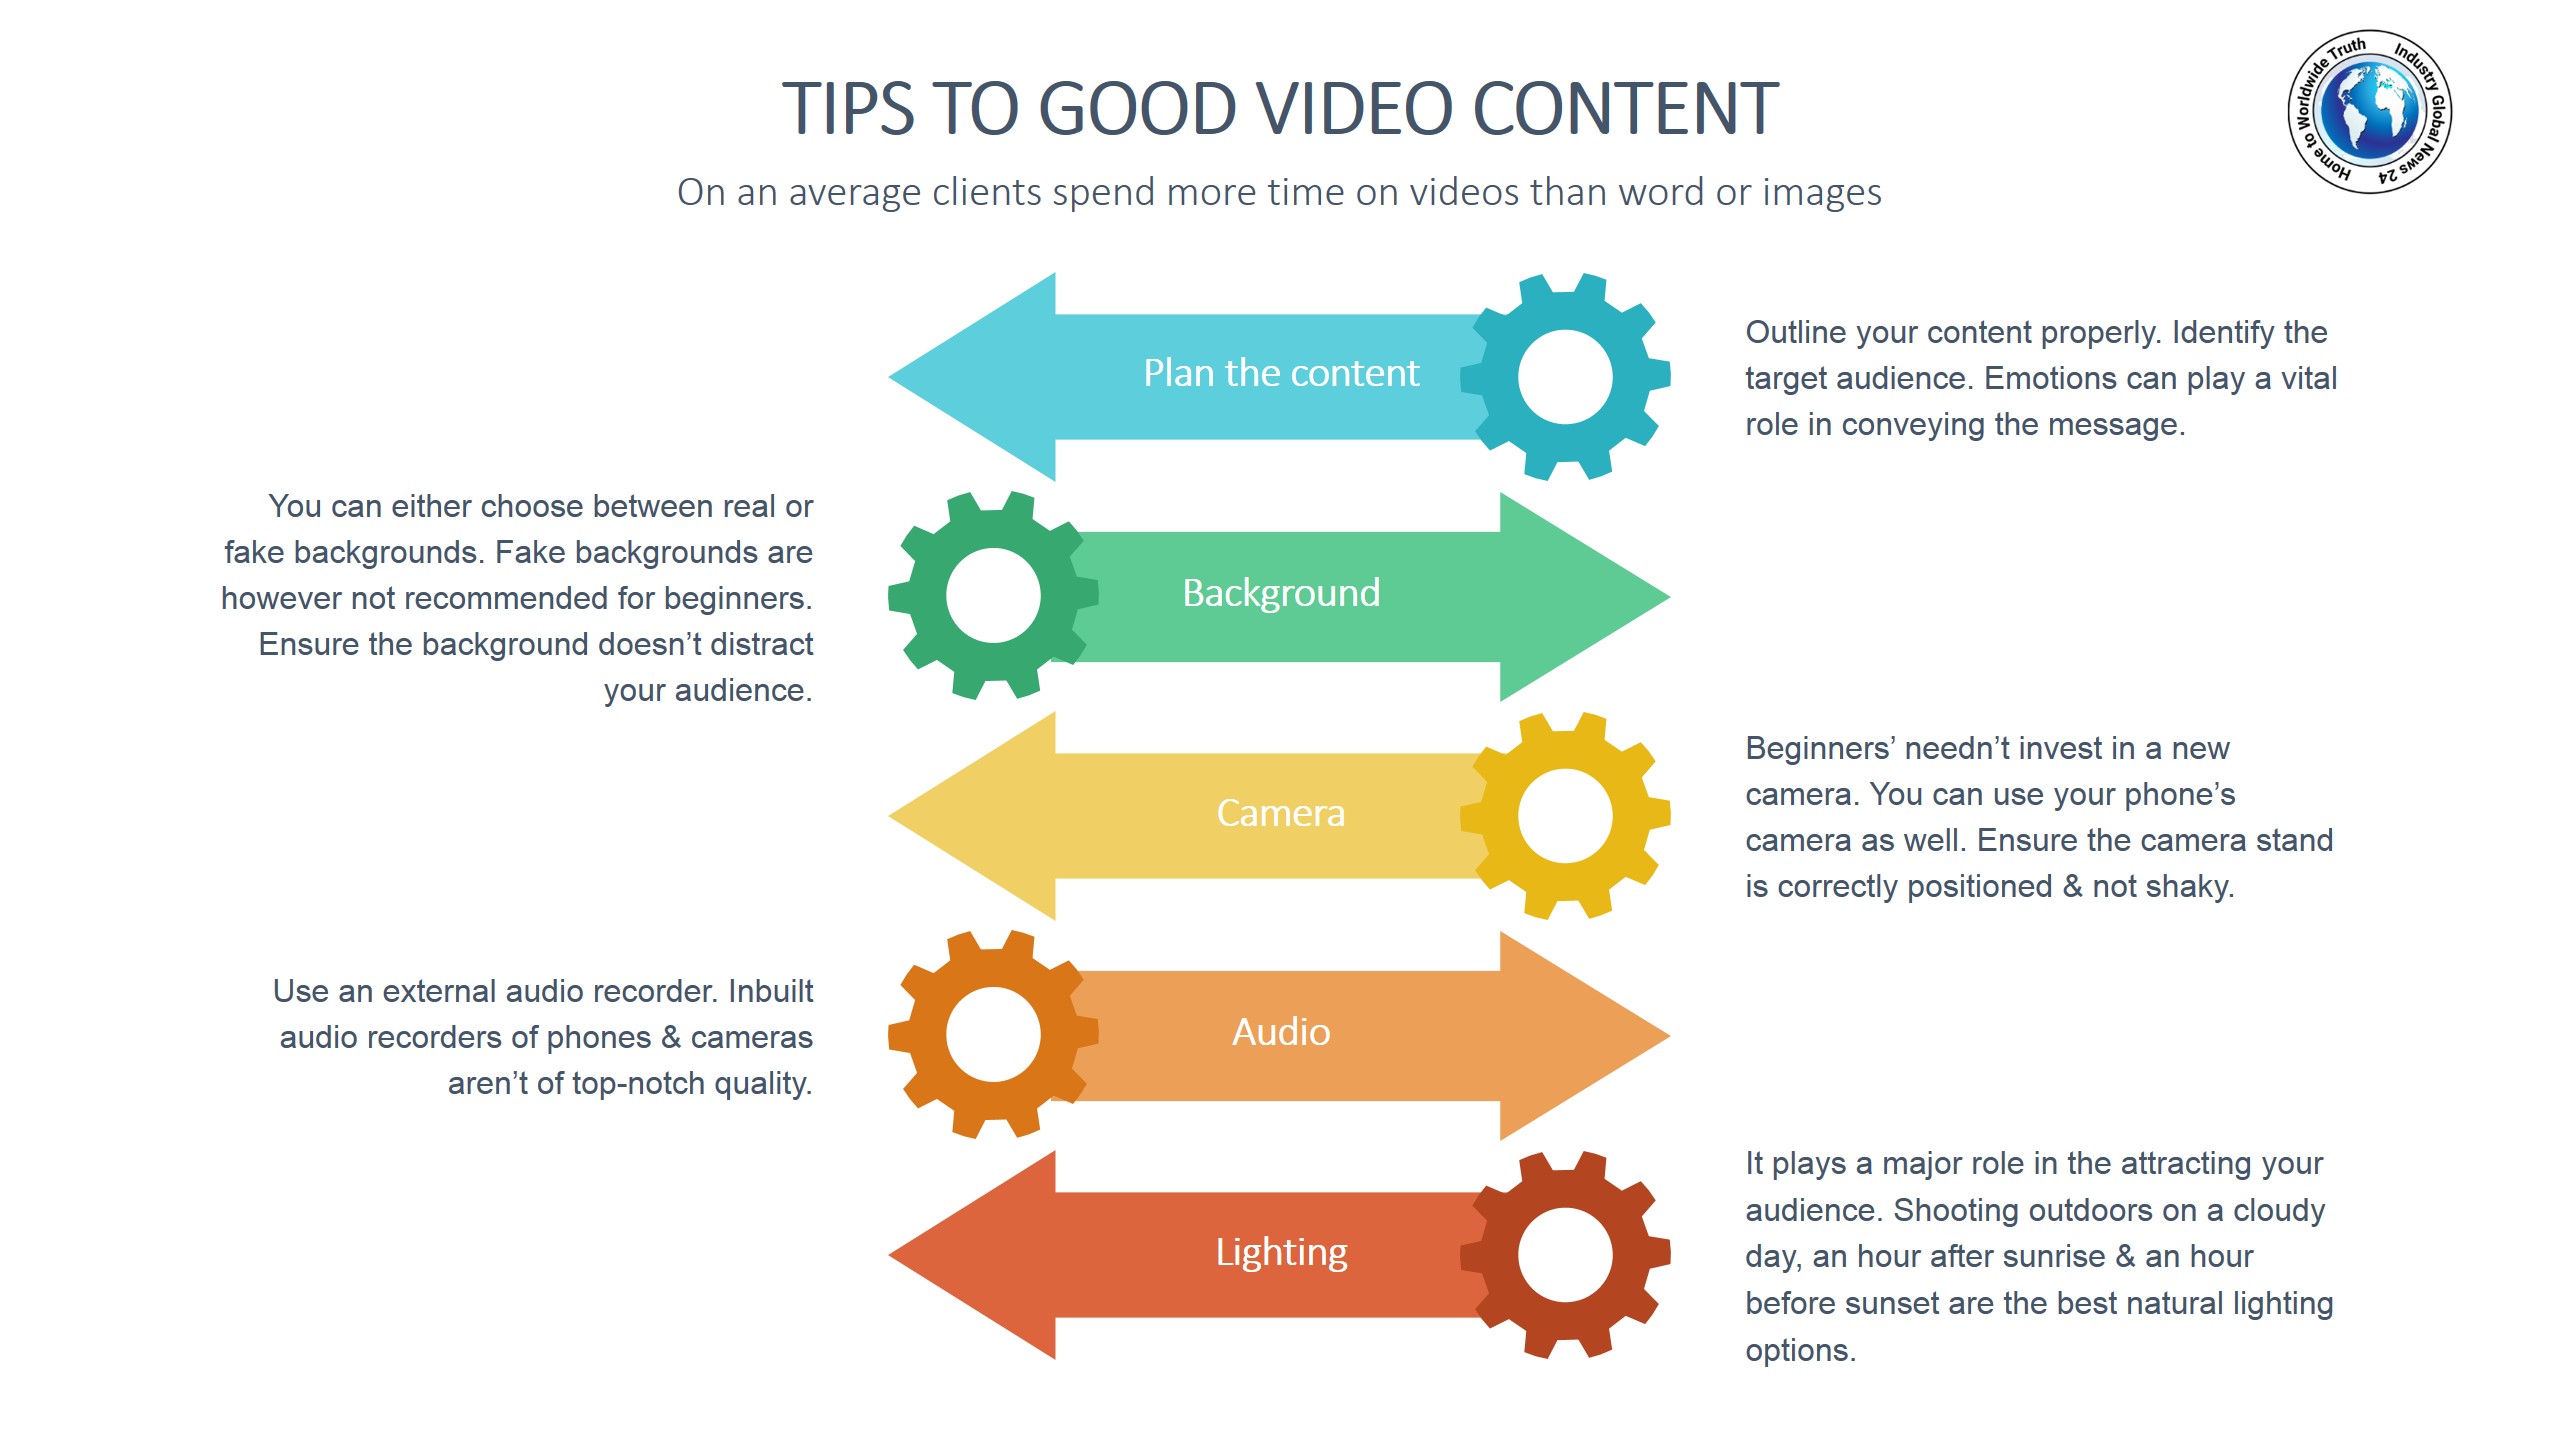 Tips to good video content